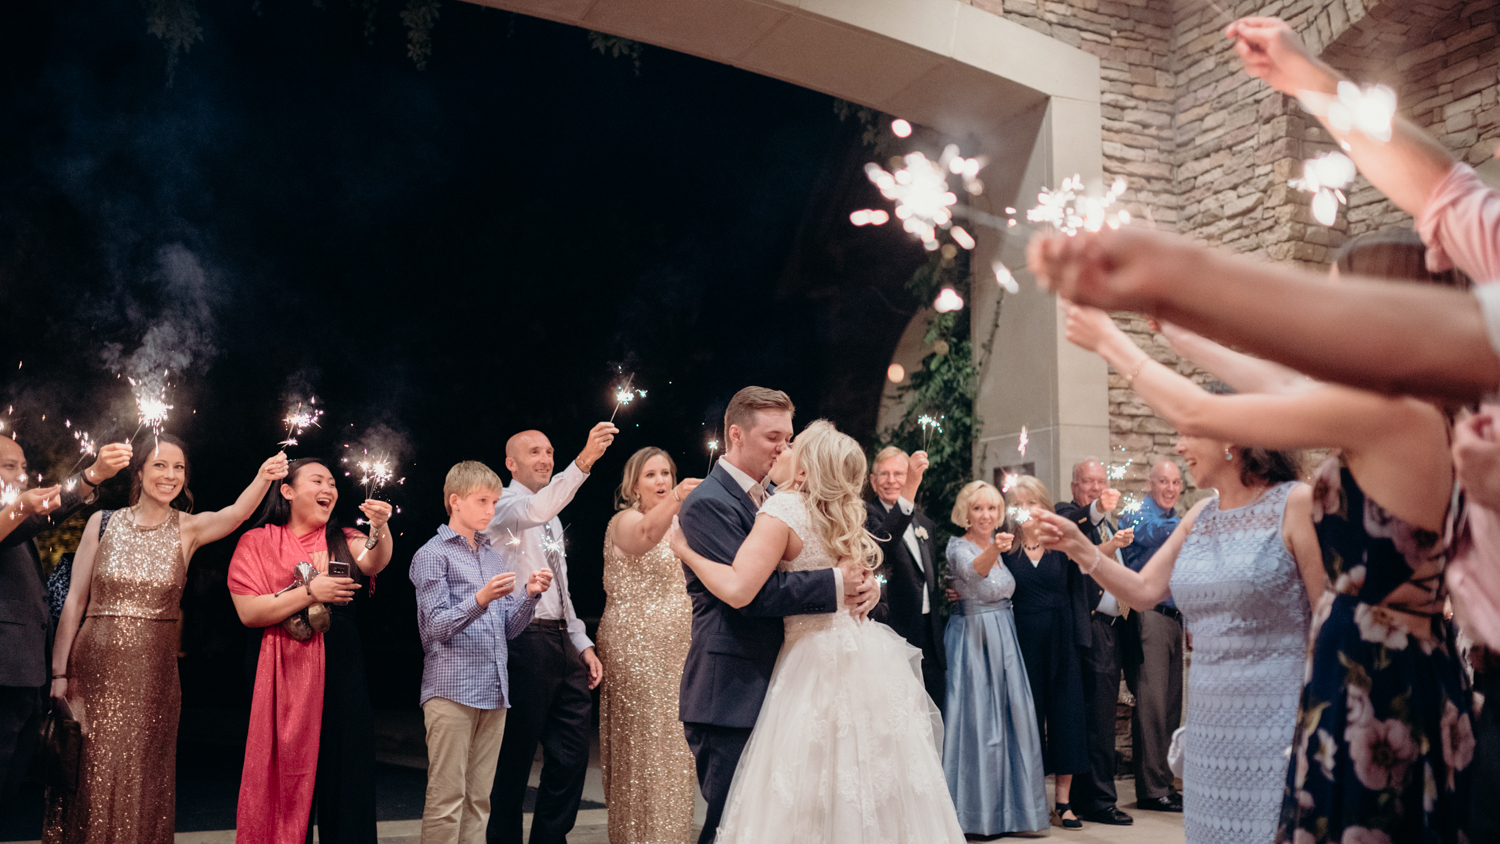 A bride and groom share a kiss during their sparkler exit after their wedding reception at Lansdowne Resort.